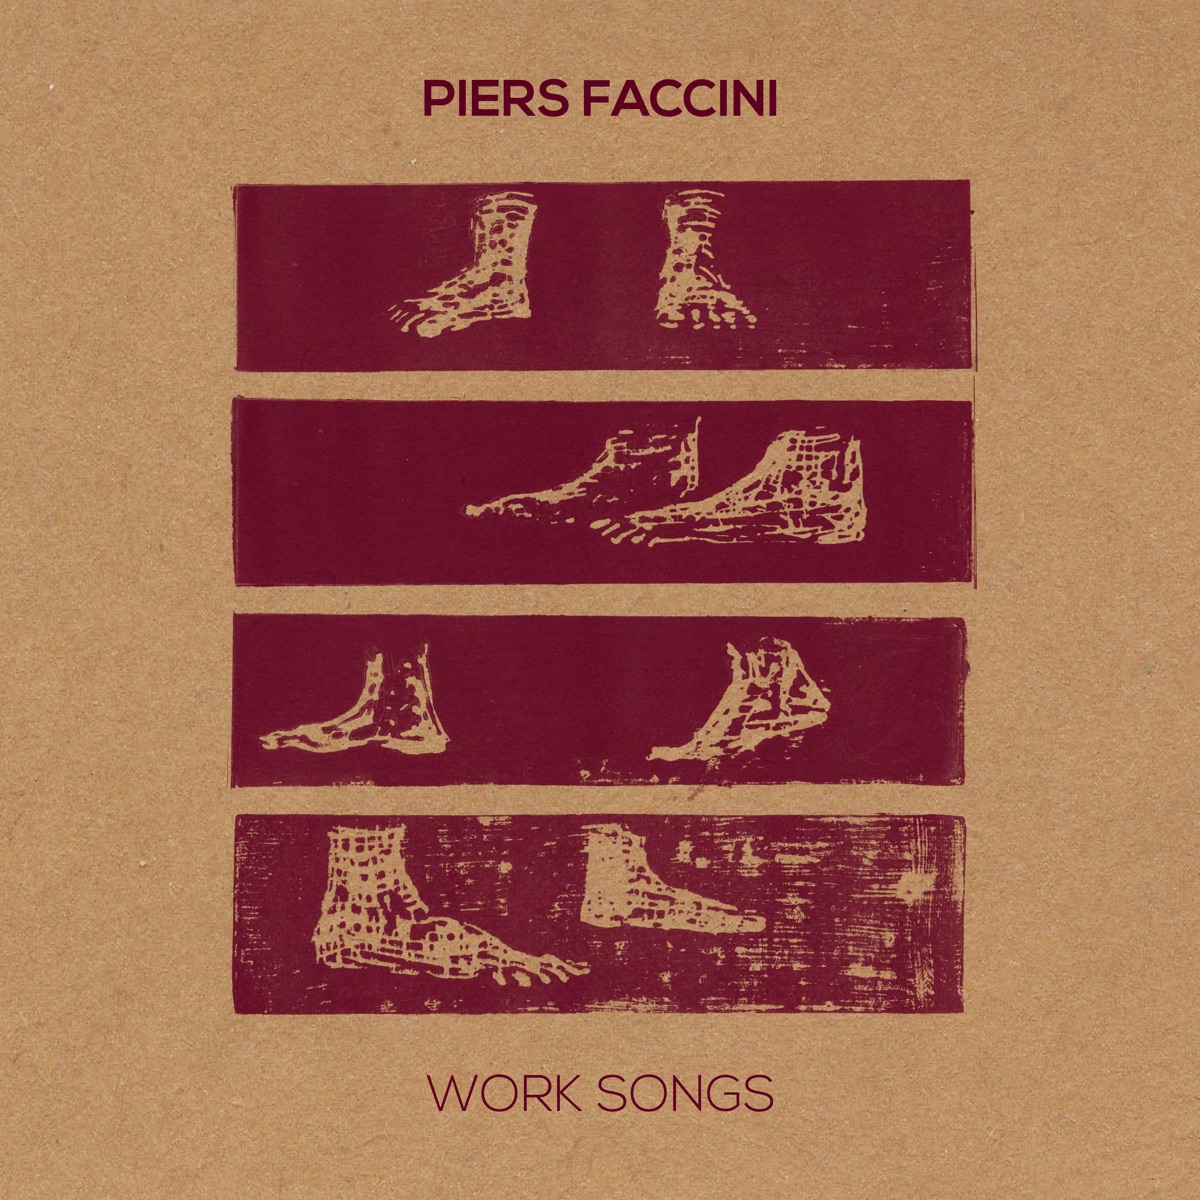 Between Dogs and Wolves by Piers Faccini on Apple Music